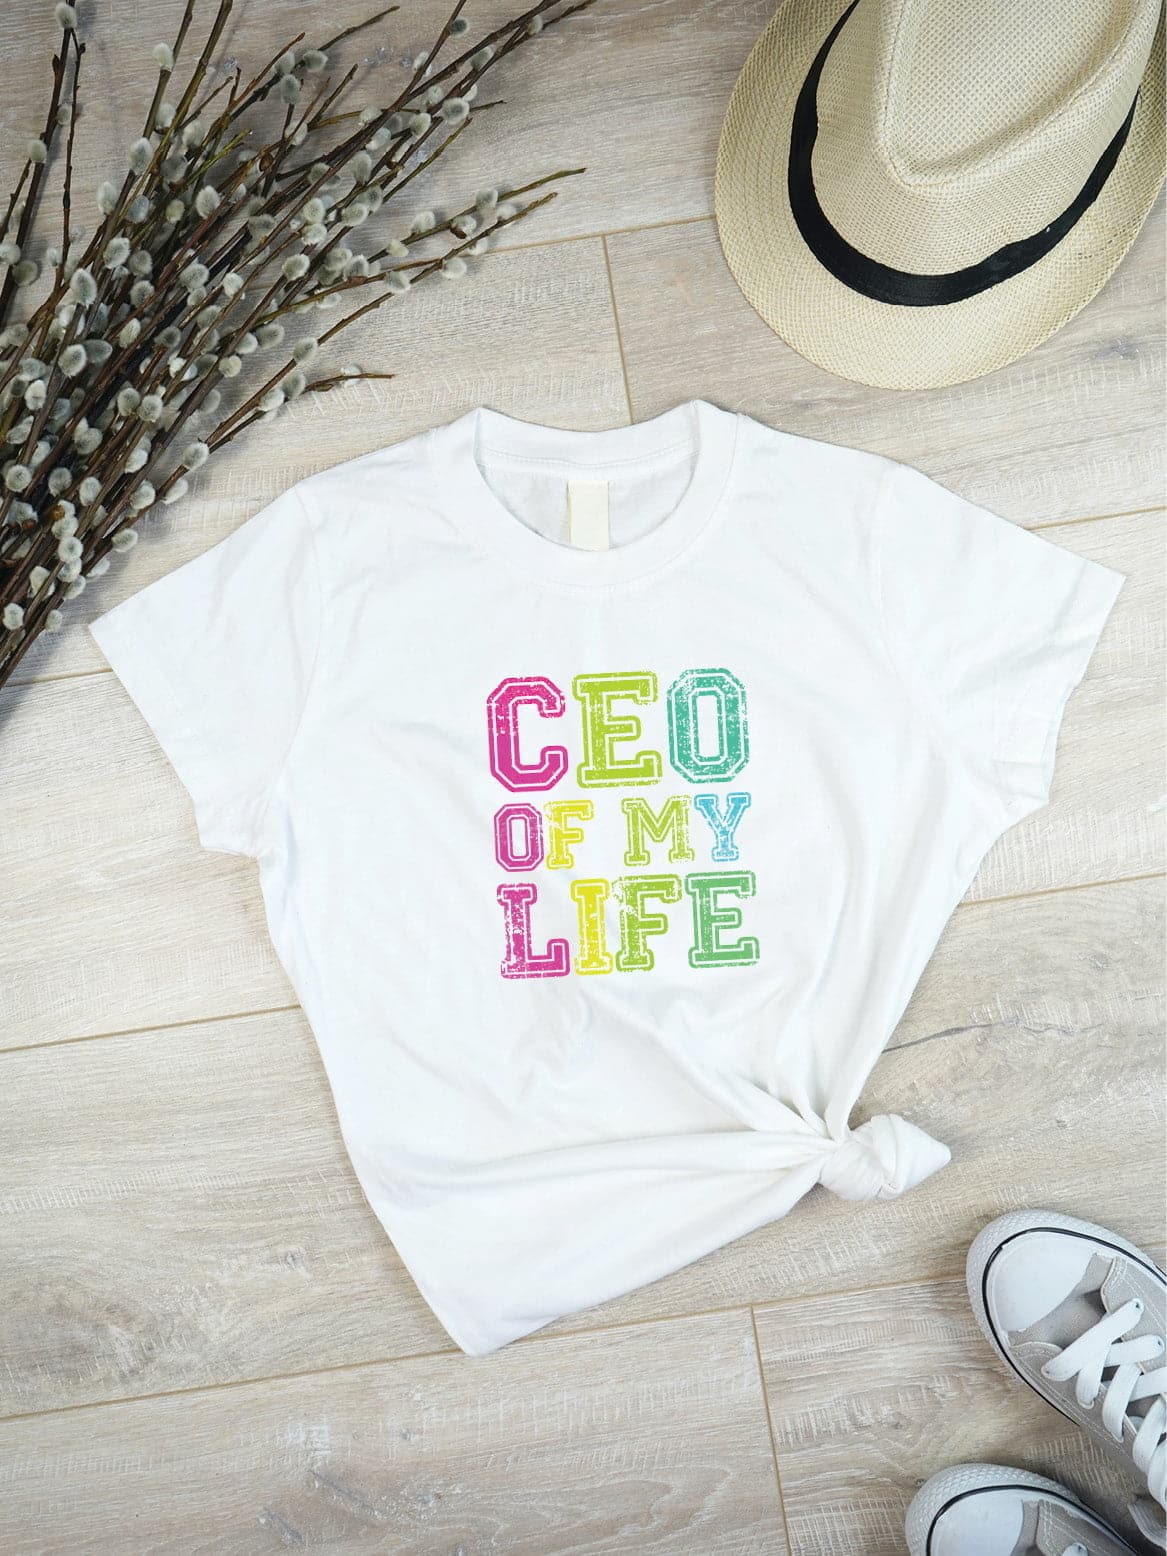 Ceo of my life